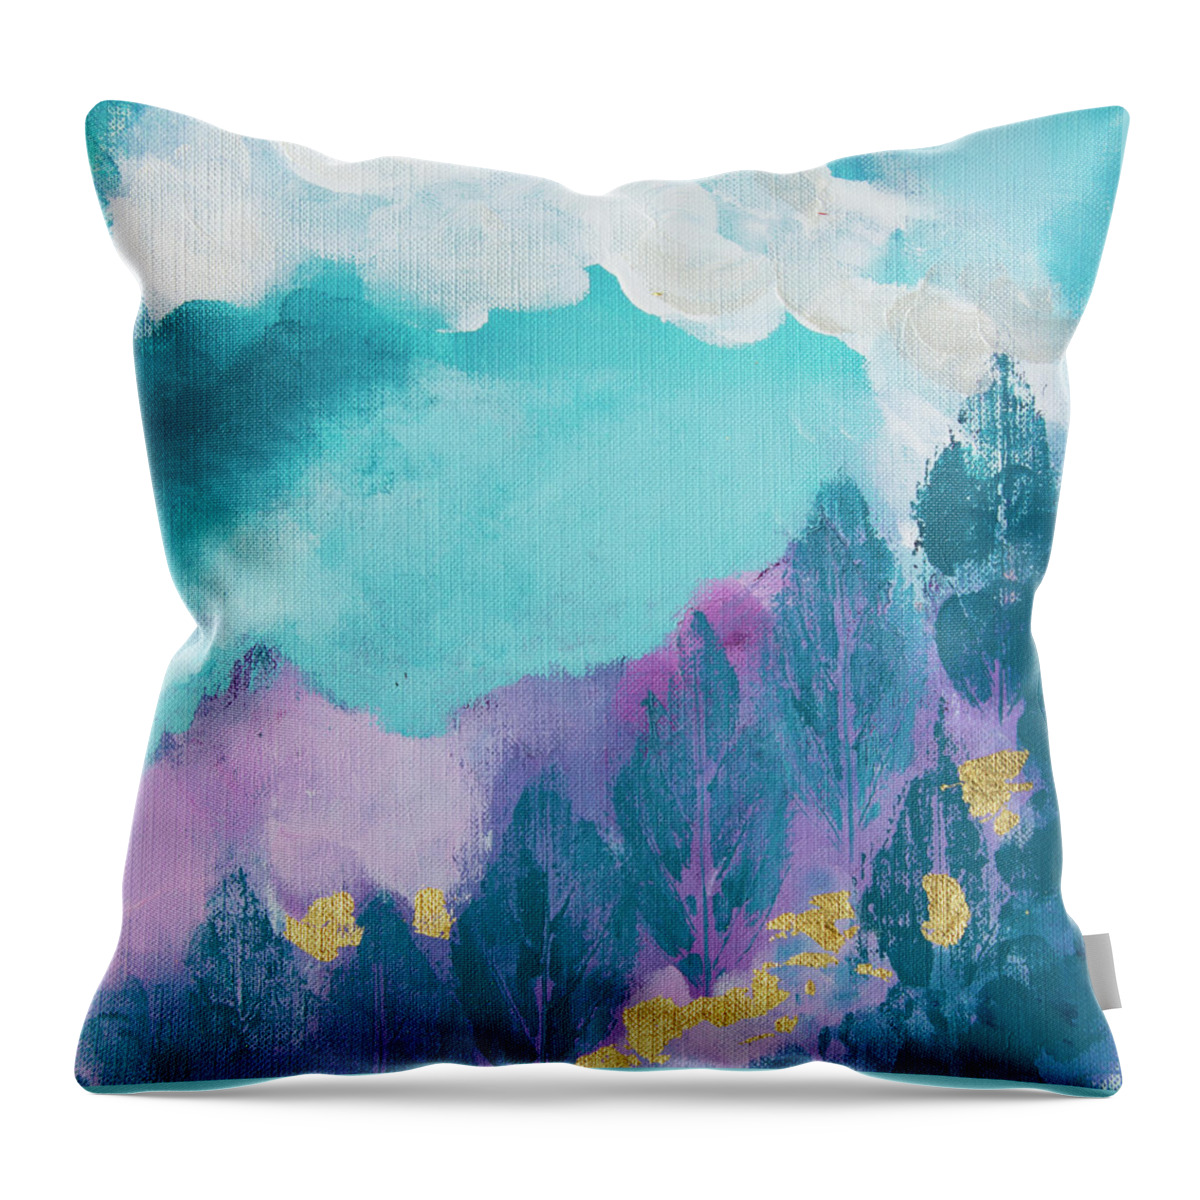  Throw Pillow featuring the painting Purple Mountains by Linh Nguyen-Ng